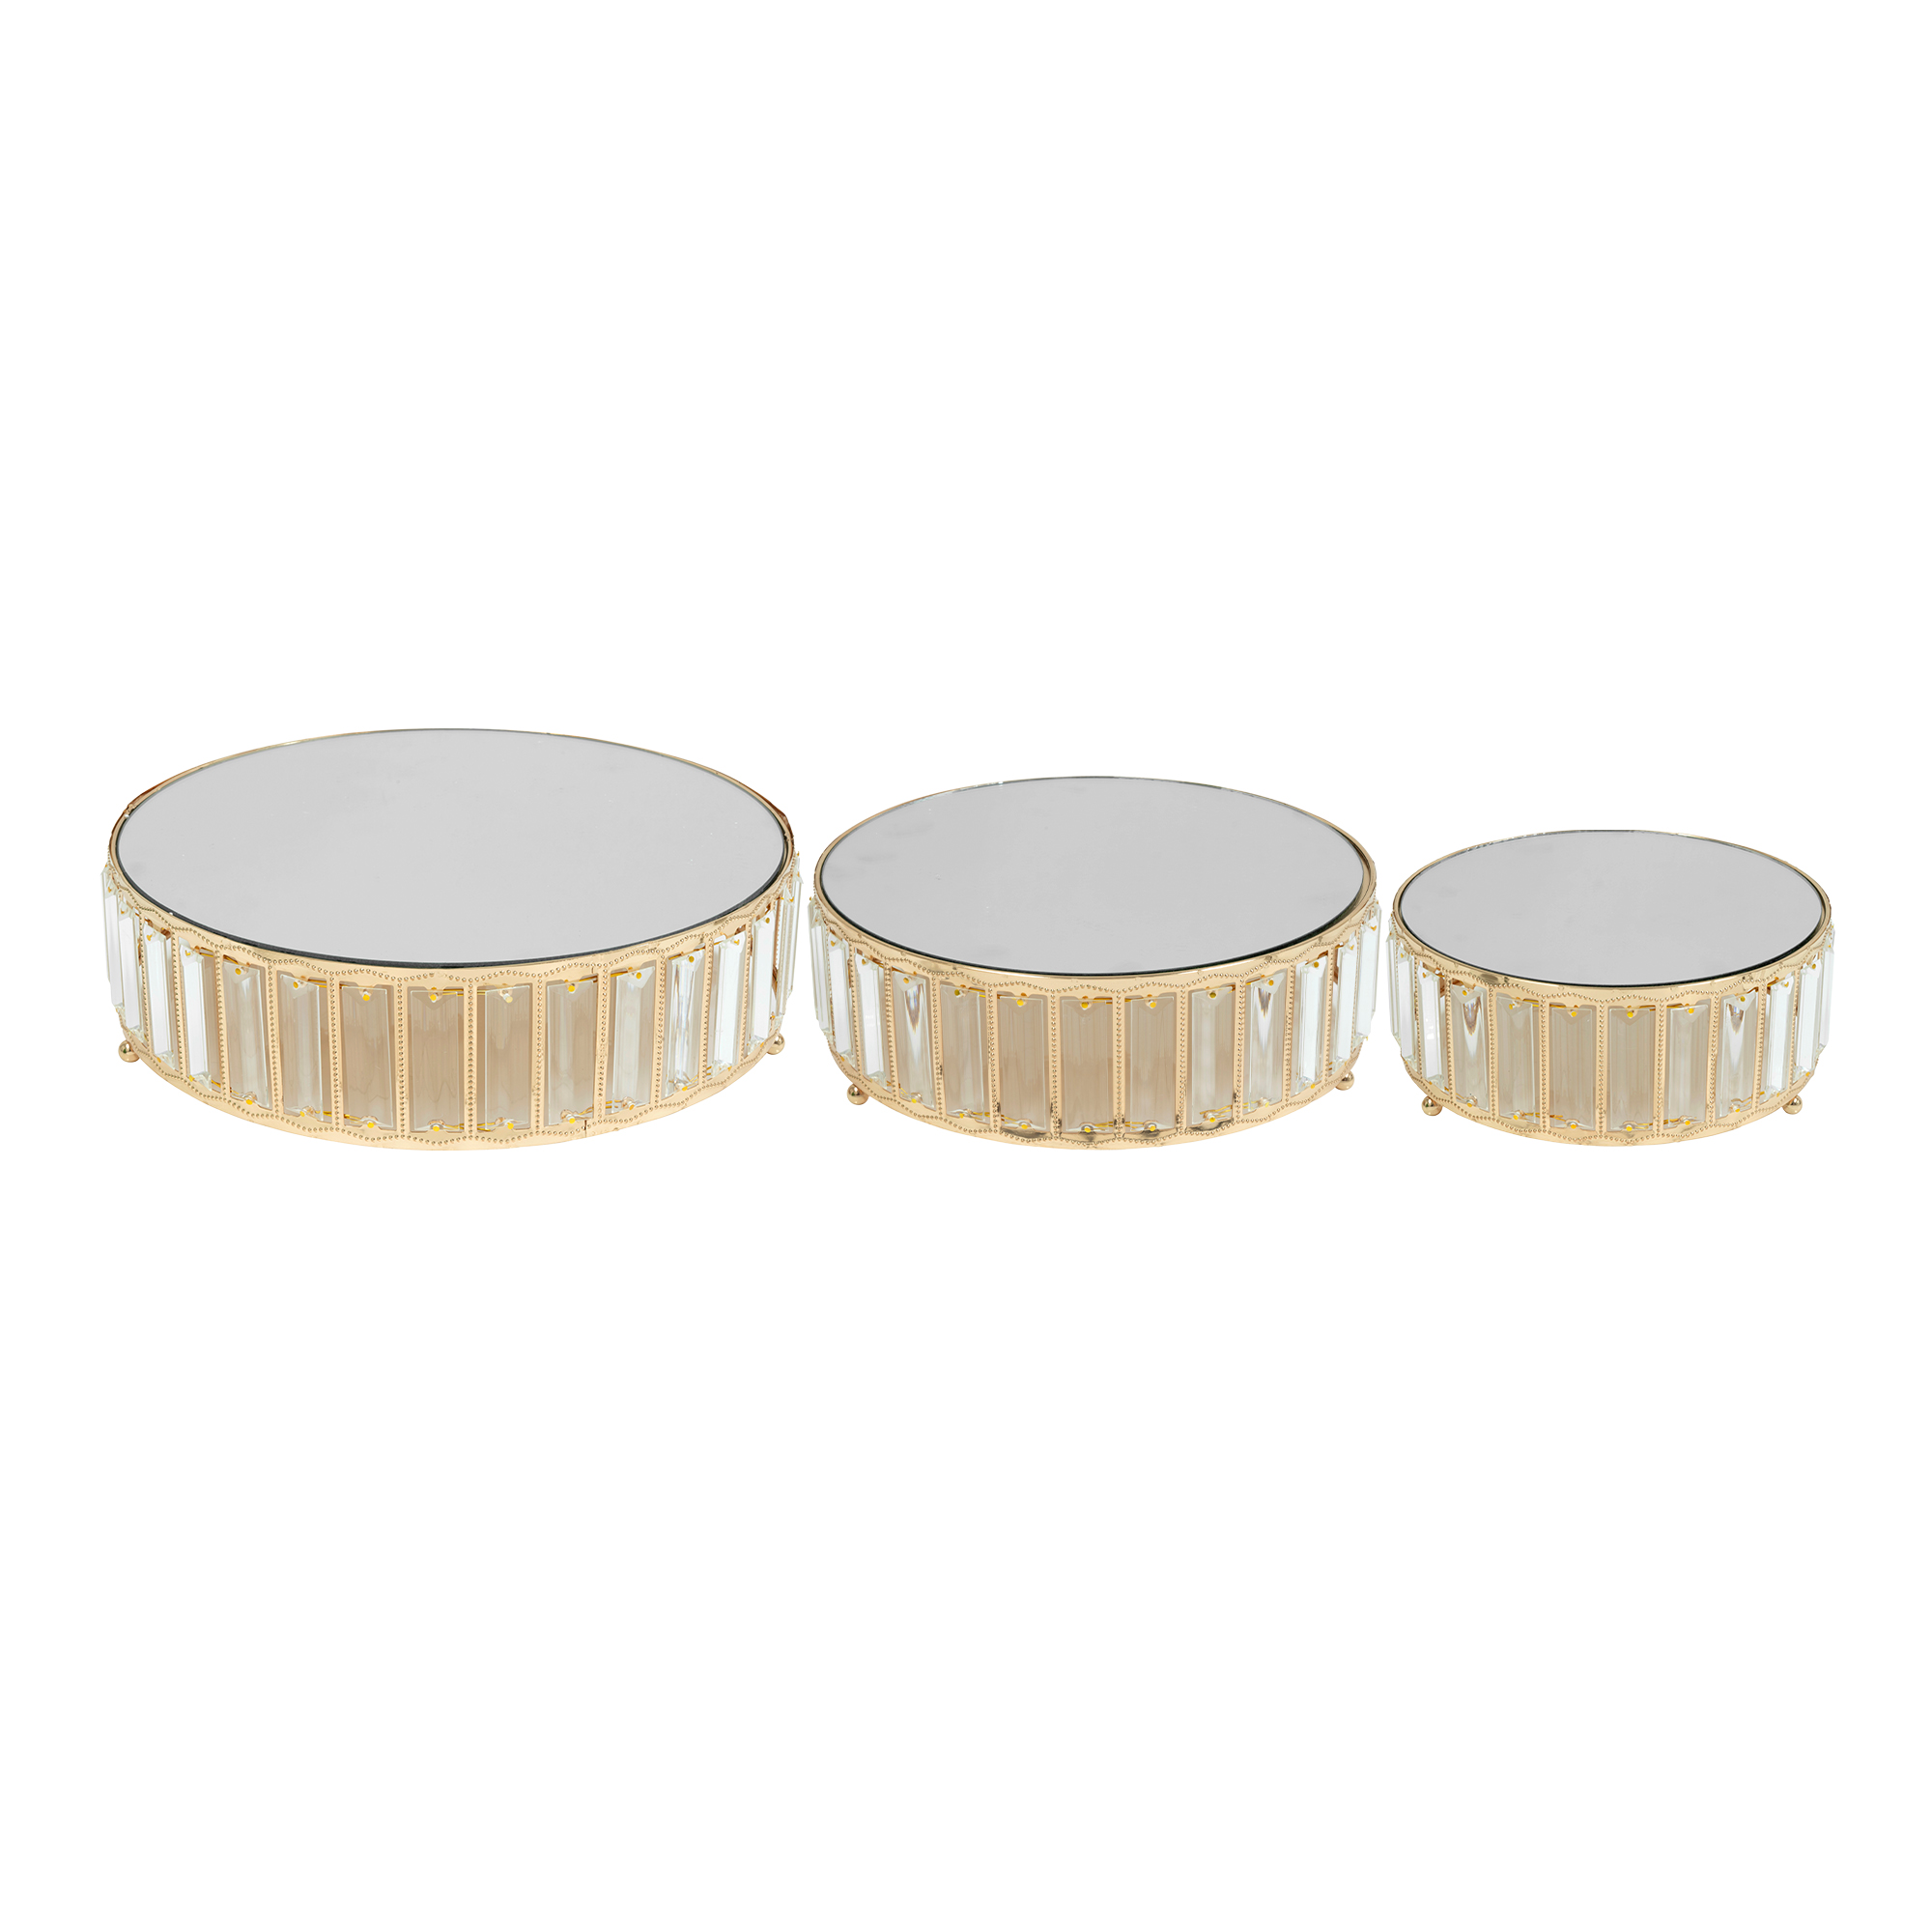 Metal Round Crystal Embellished Cake Stand With Mirror Top 3pc/set - Gold